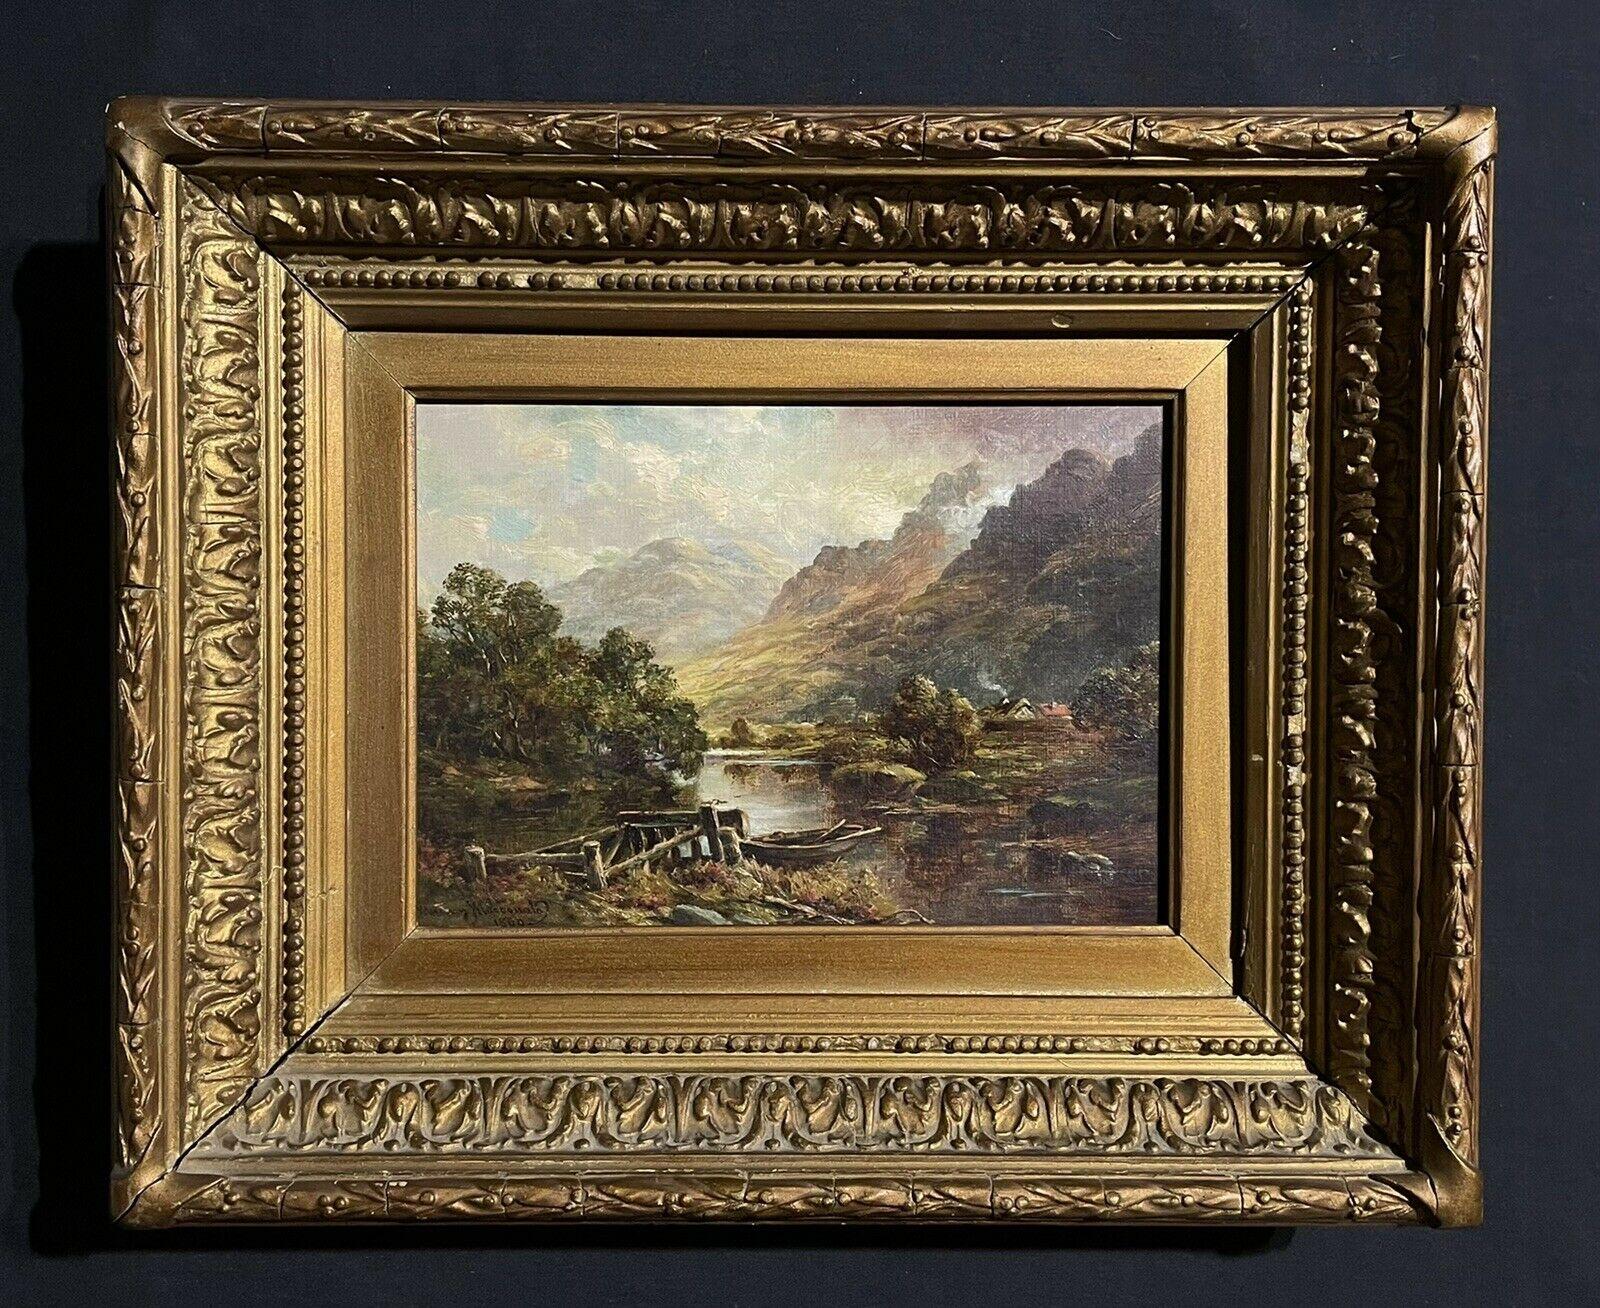 Artist/ School: Scottish School, circa 1870's

Title: The Highland River Landscape

Medium: oil painting on canvas, framed

framed: 13.25 x 16.25 inches
canvas:  7 x 10 inches

Provenance: private collection, UK

Condition: The painting is in